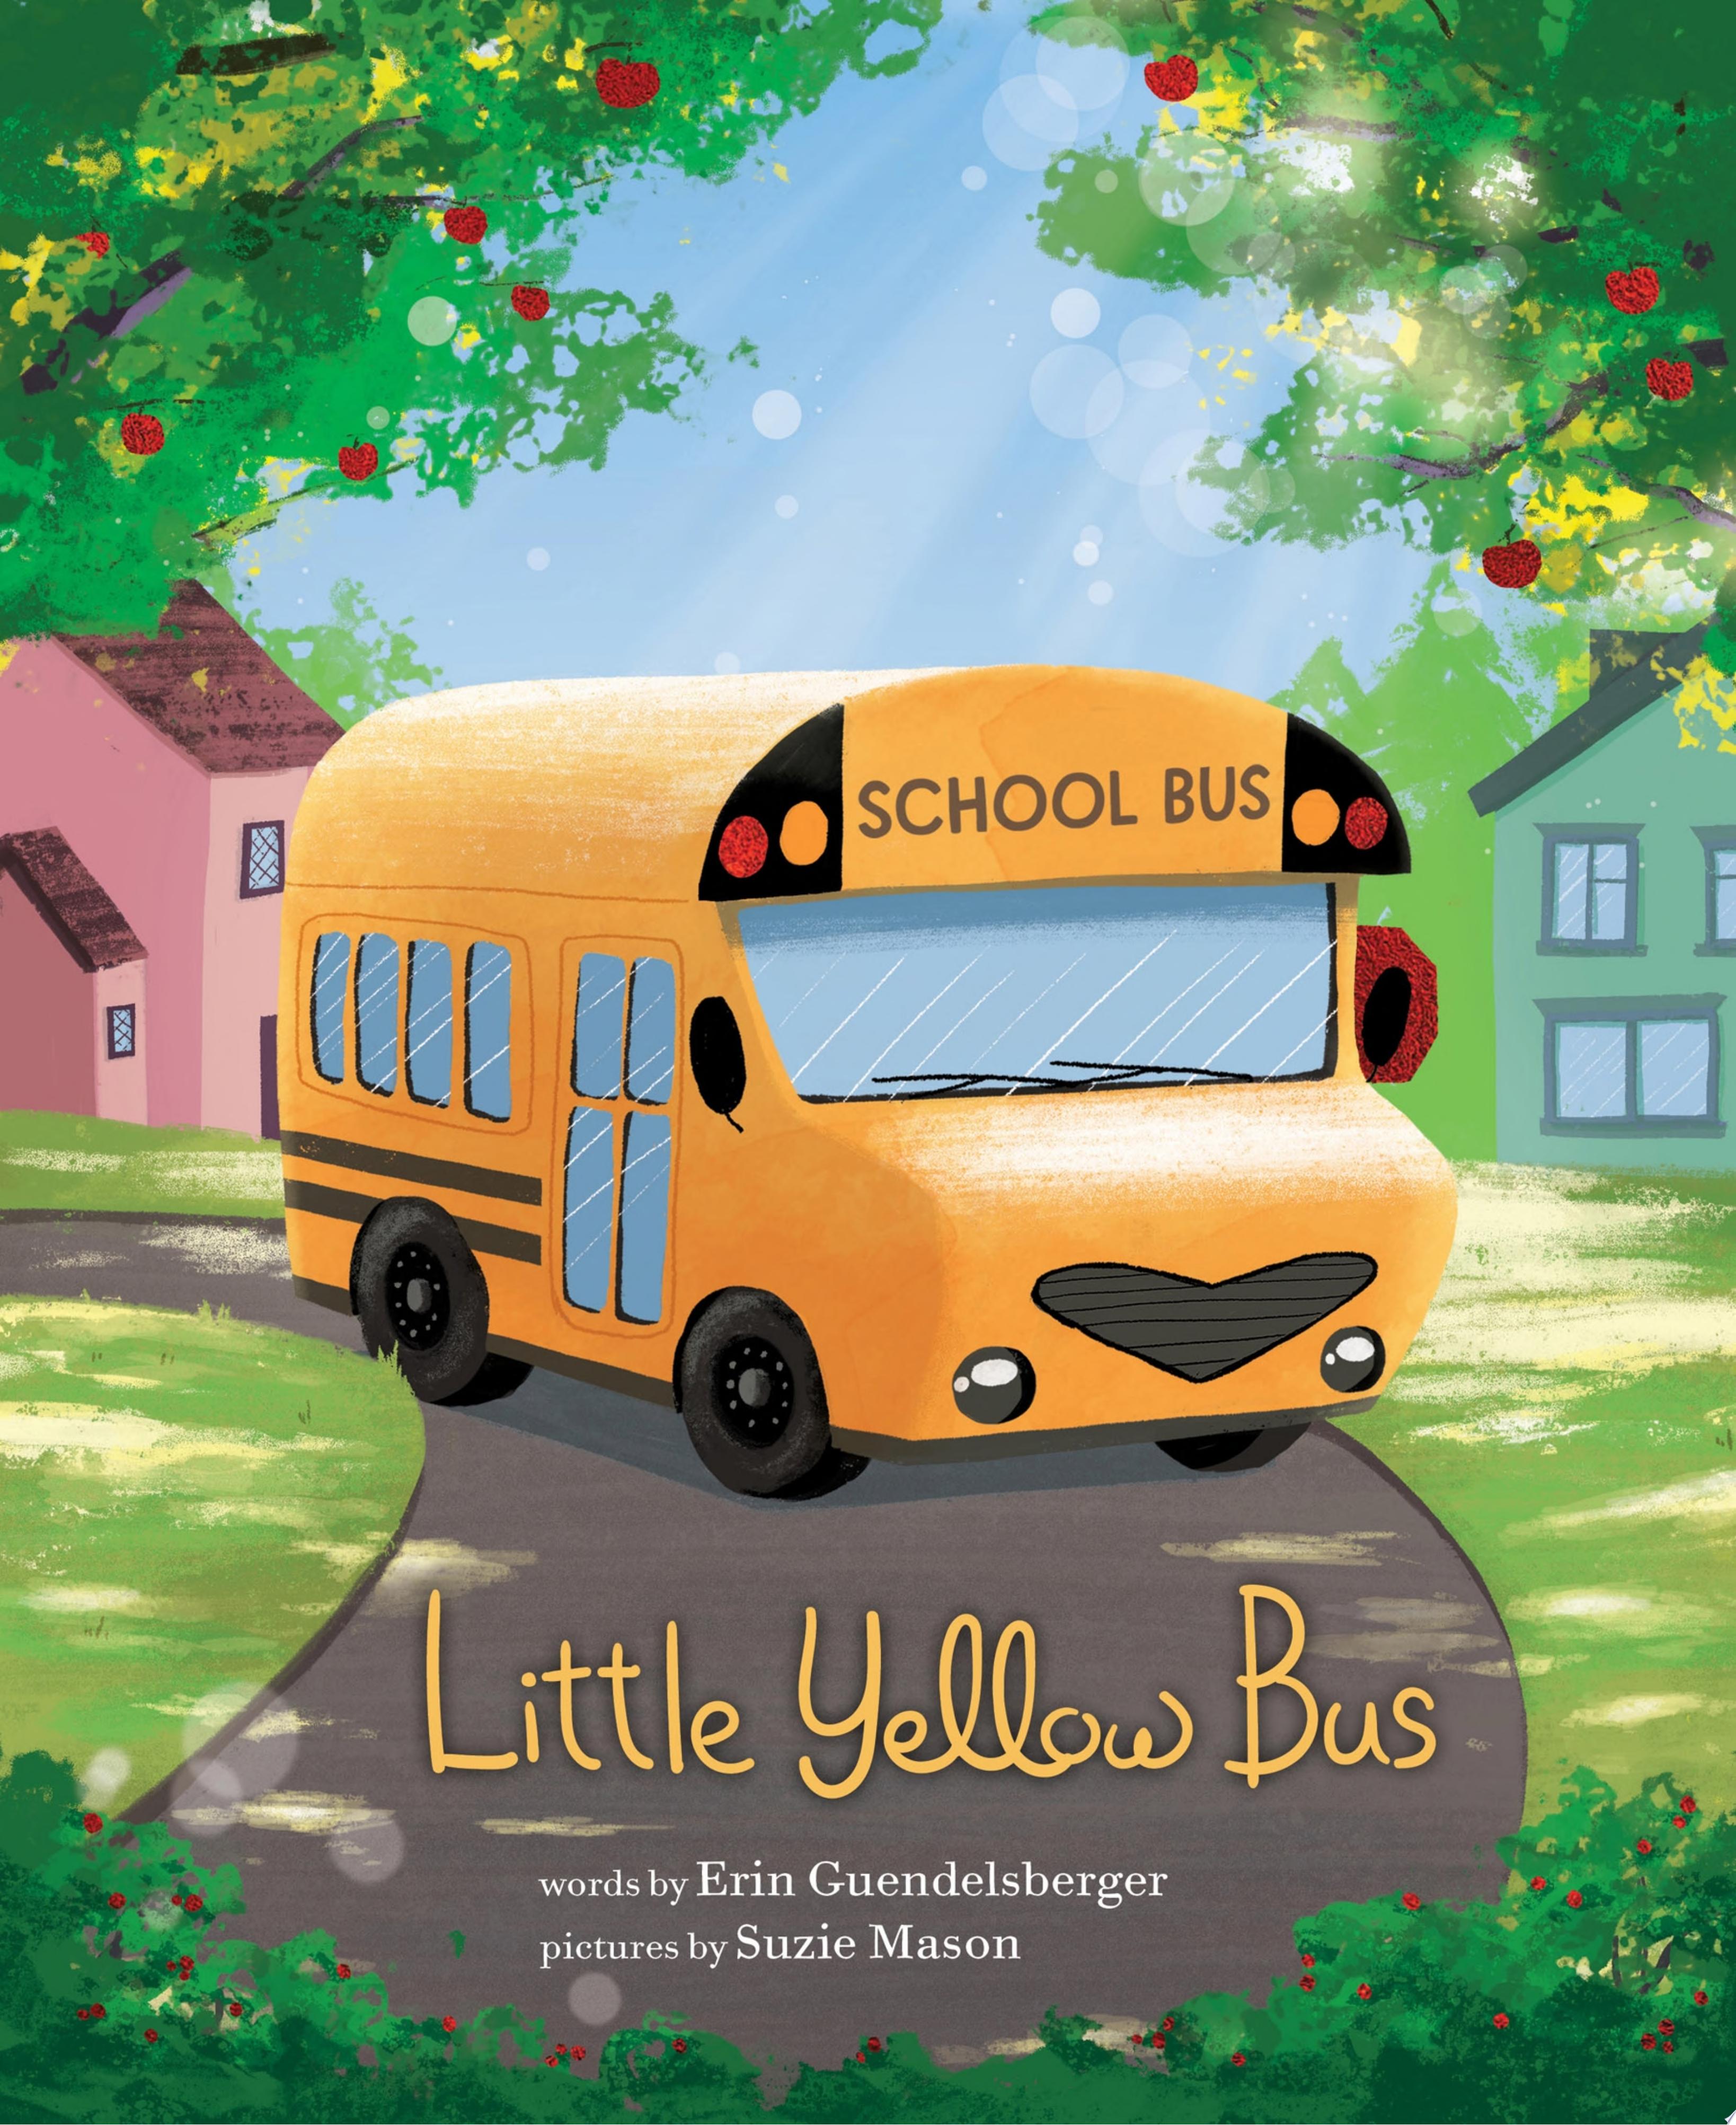 Image for "Little Yellow Bus"